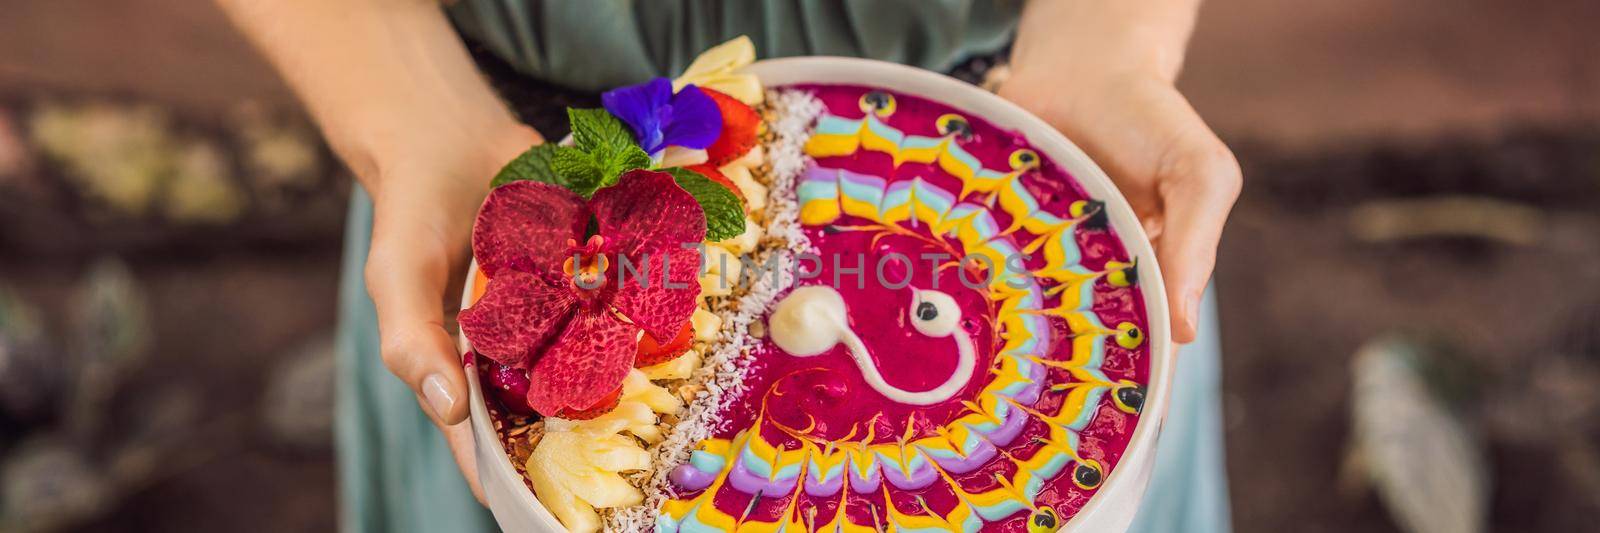 BANNER, LONG FORMAT Young woman having a mediterranean breakfast, eats Healthy tropical breakfast, smoothie bowl with tropical fruits, decorated with a pattern of colorful yogurt with turmeric and spirulina. It is also decorated with fruits, flowers, chia seeds, coconut, granola, pineapple, mint and strawberries by galitskaya